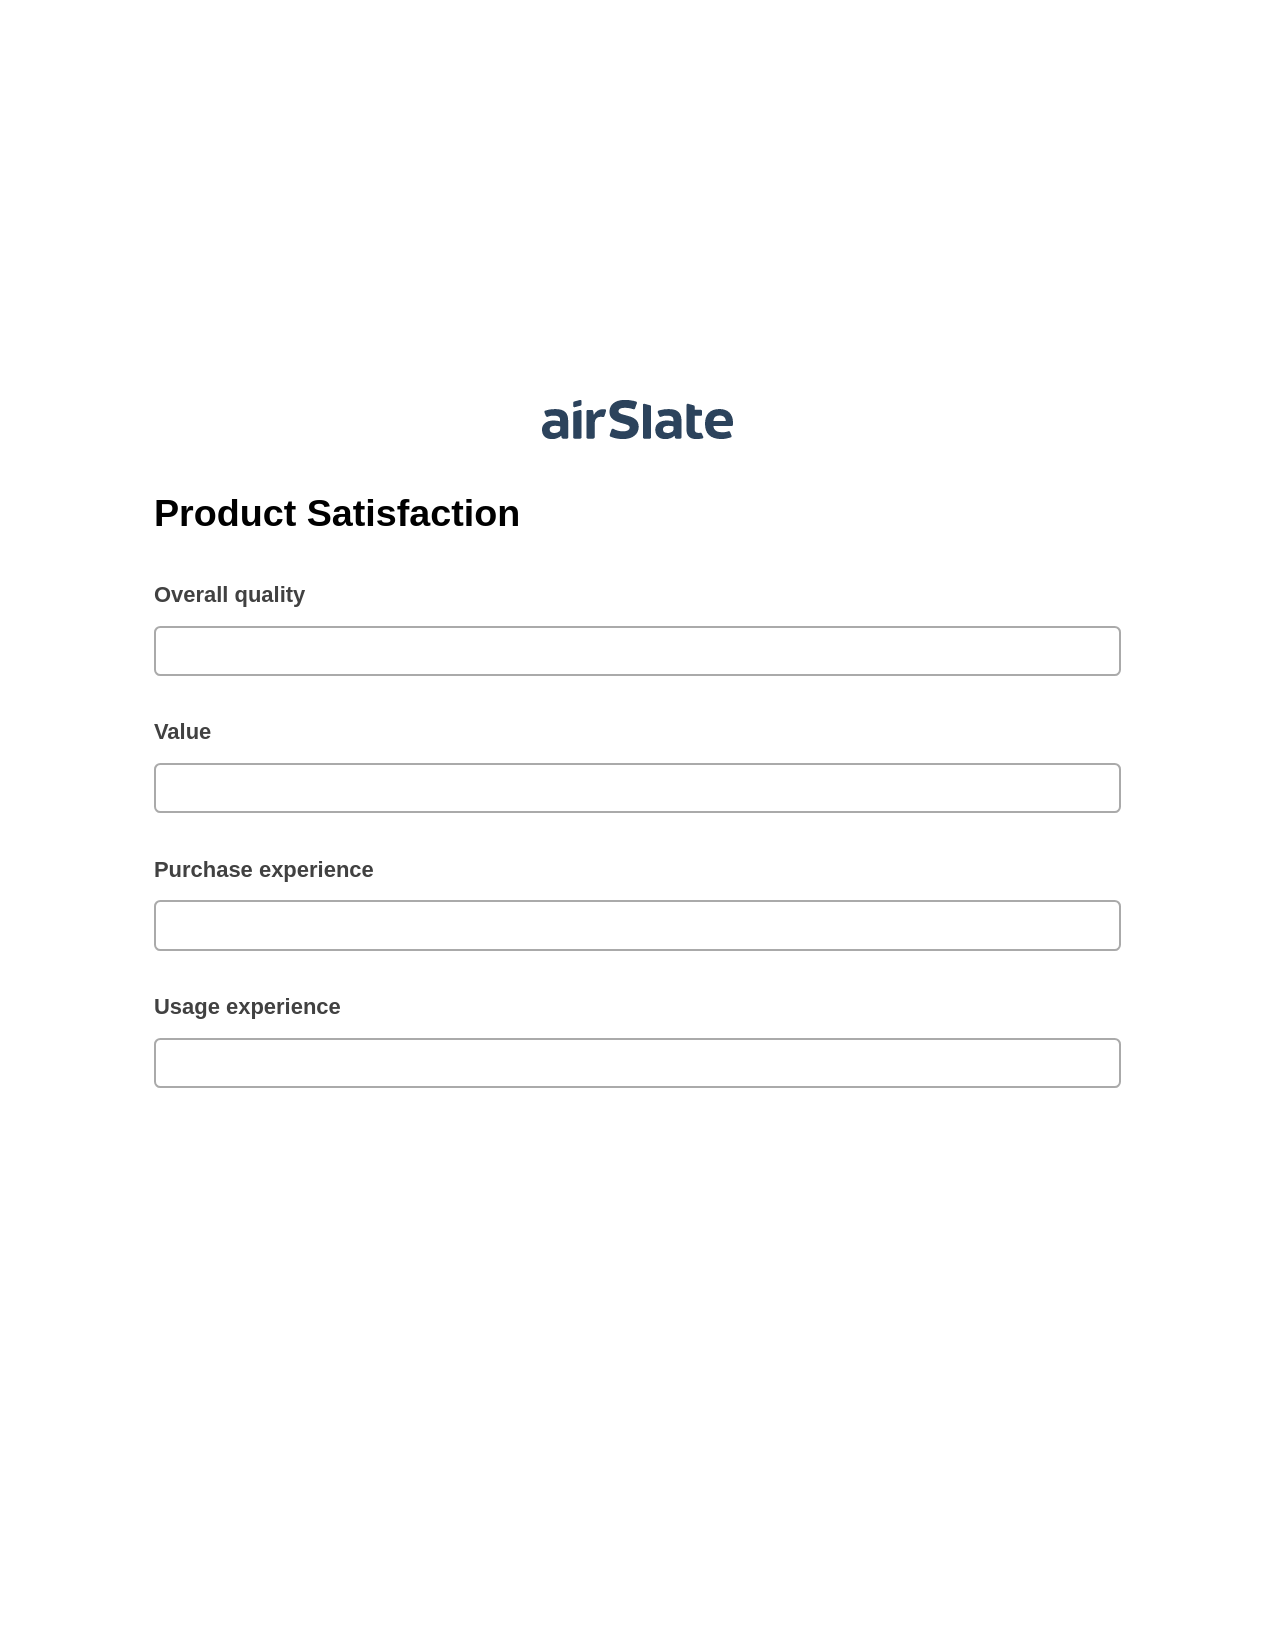 Product Satisfaction Pre-fill Slate from MS Dynamics 365 Records Bot, Assign Slate Name Bot, Export to Excel 365 Bot